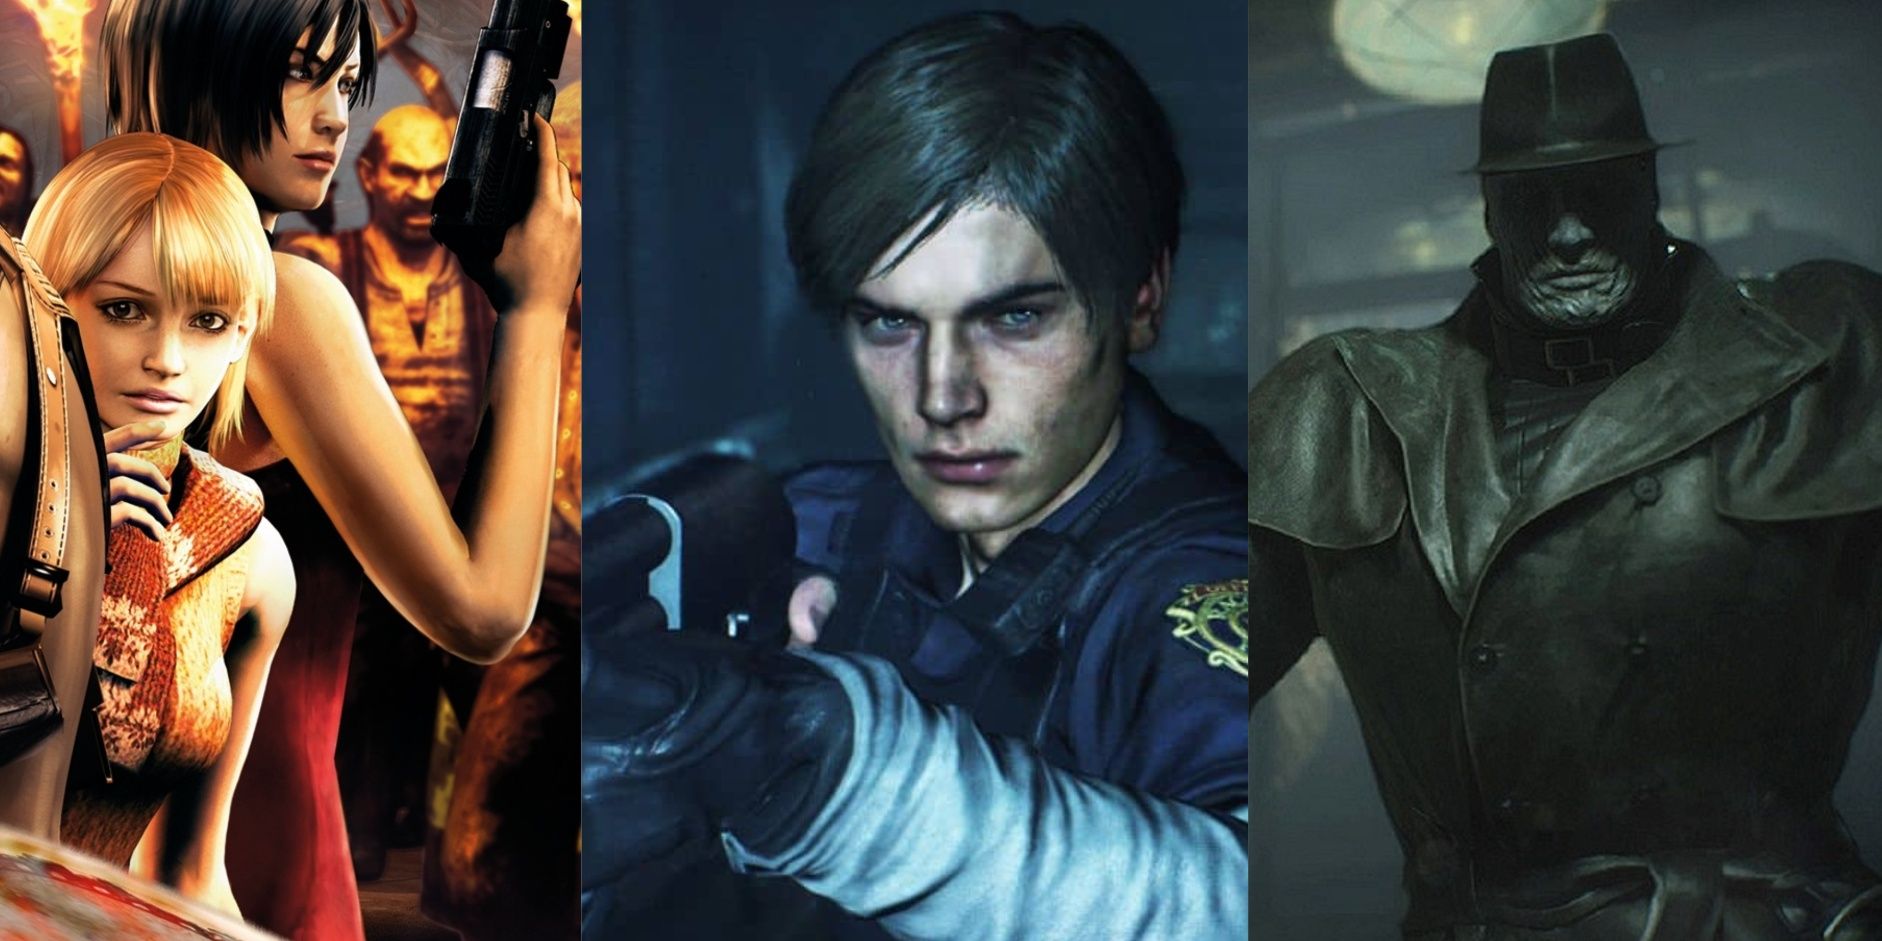 𝐑𝐮𝐥𝐞𝐓𝐢𝐦𝐞 on X: Based on Resident Evil 4 Remake's opening! Does  that make Leon A and Claire B canon?  / X